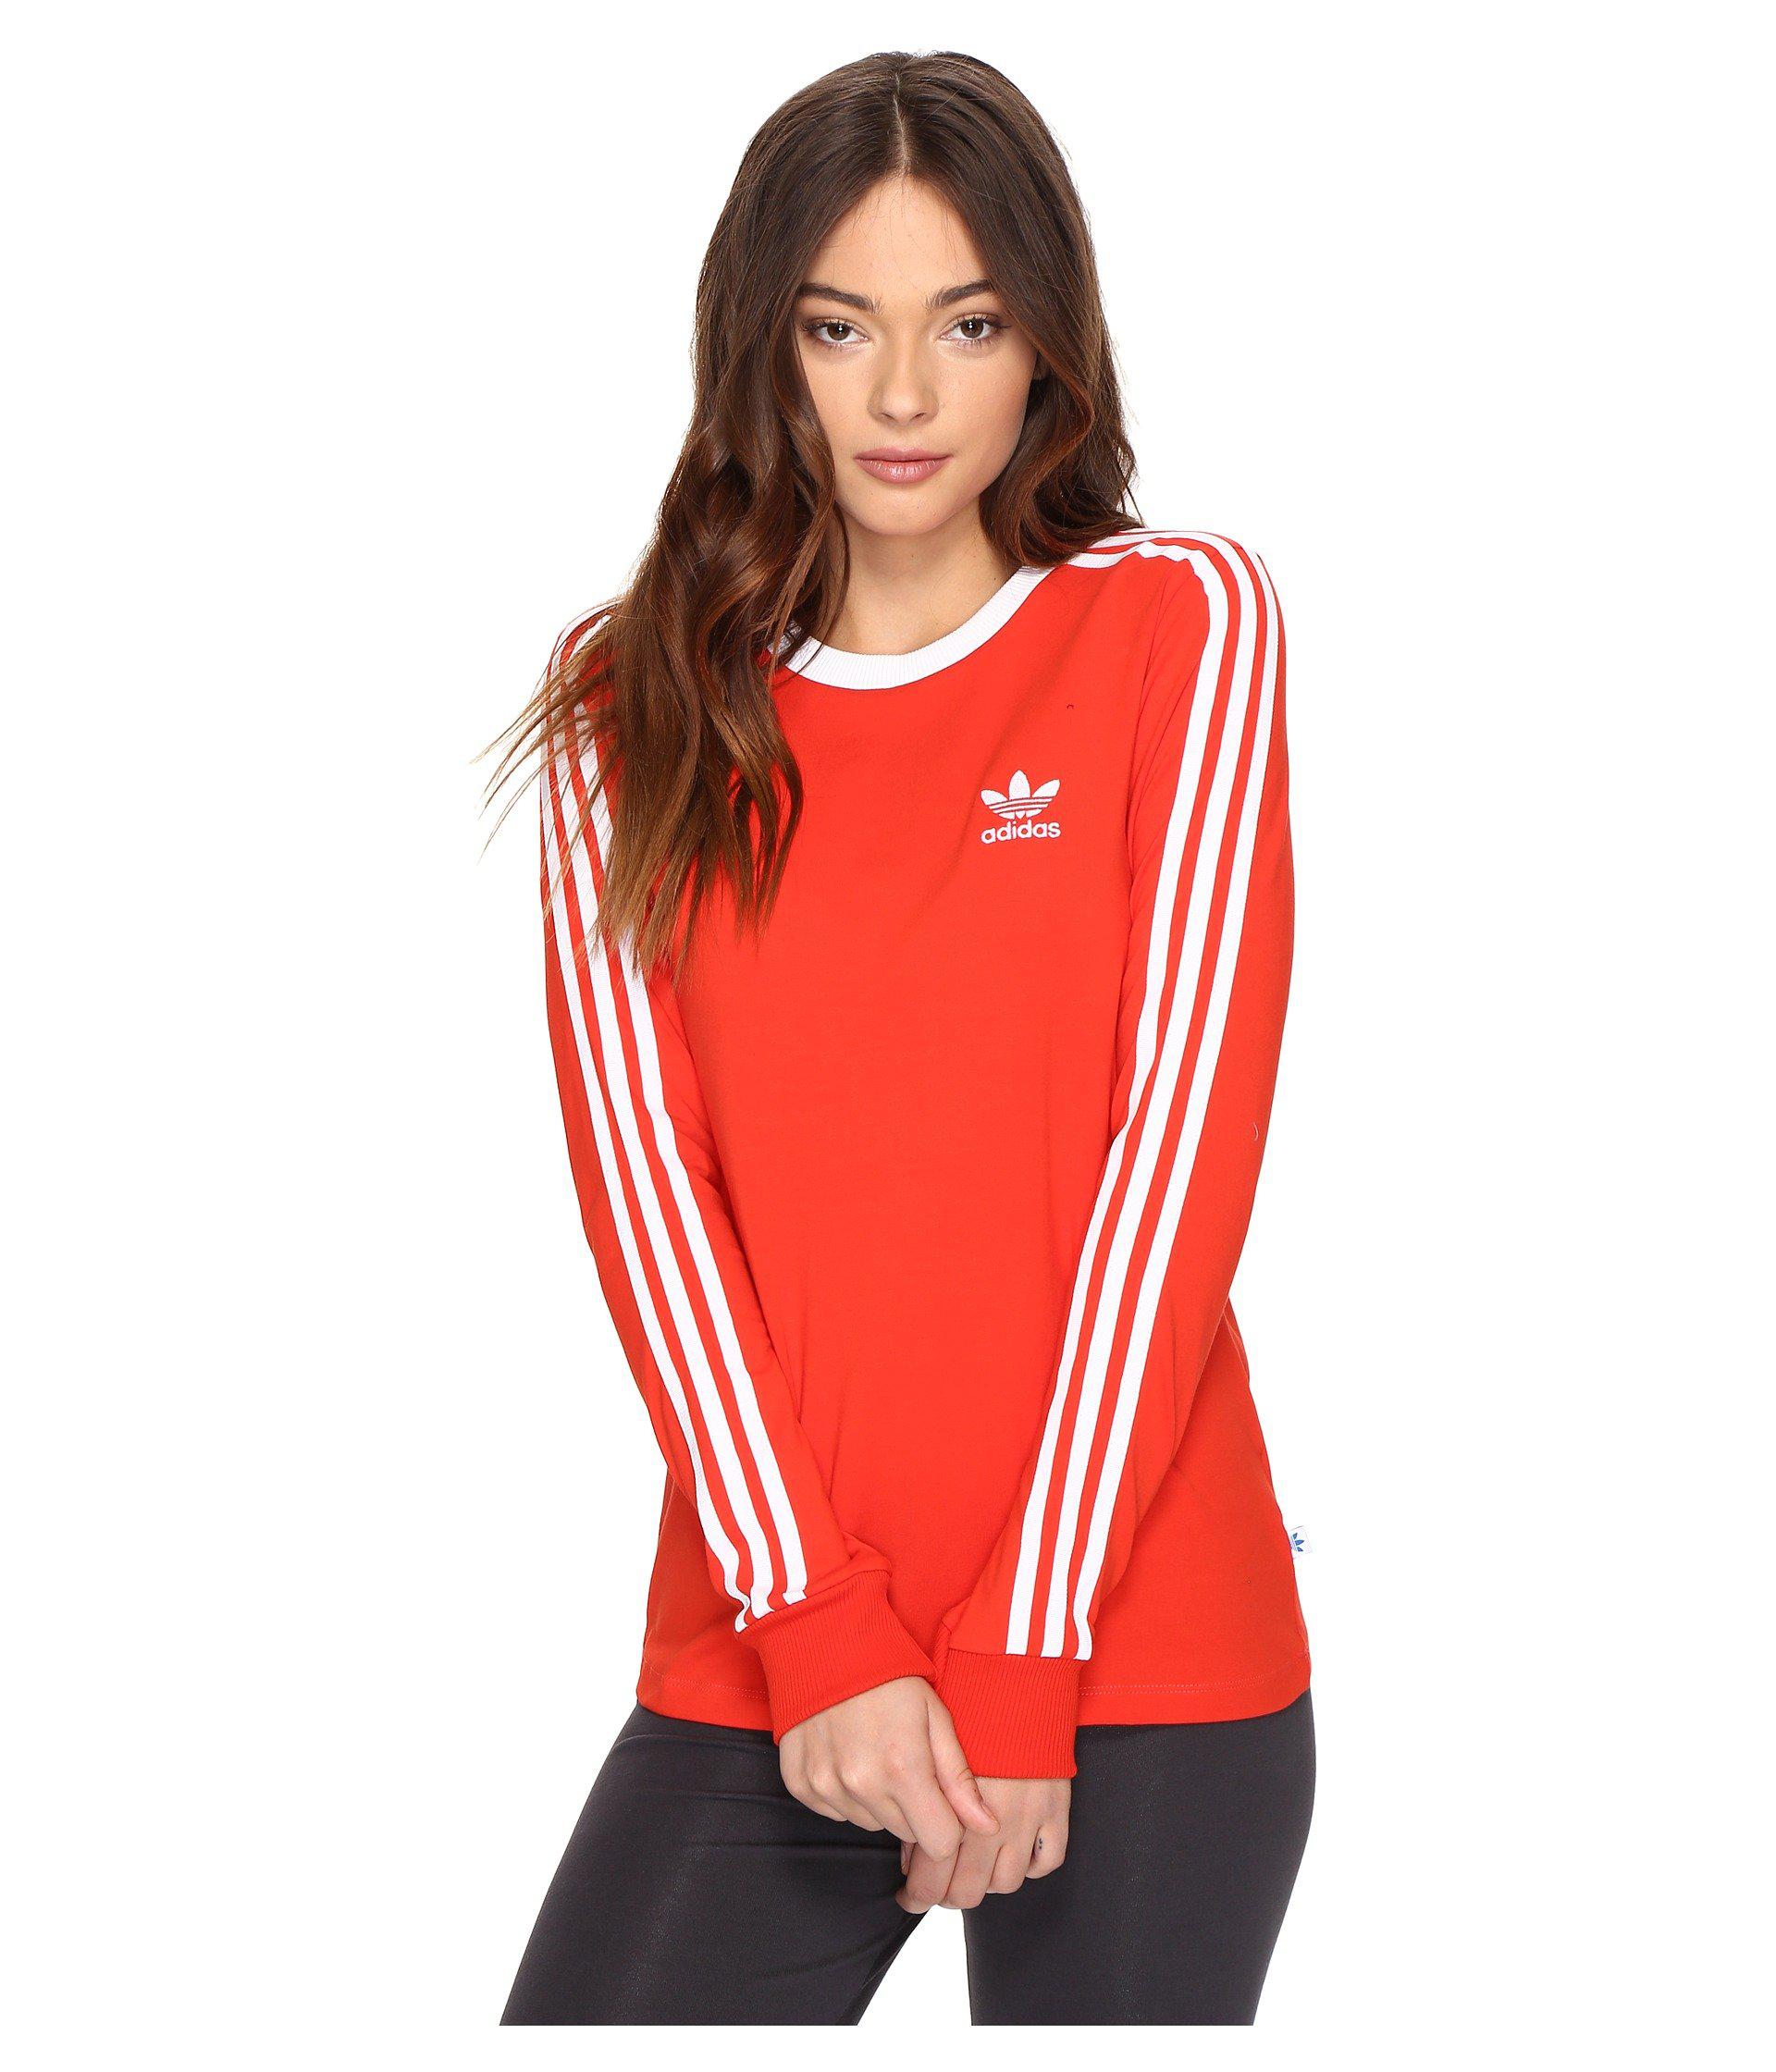 adidas Originals Cotton 3-stripes Long Sleeve Tee in Red - Lyst